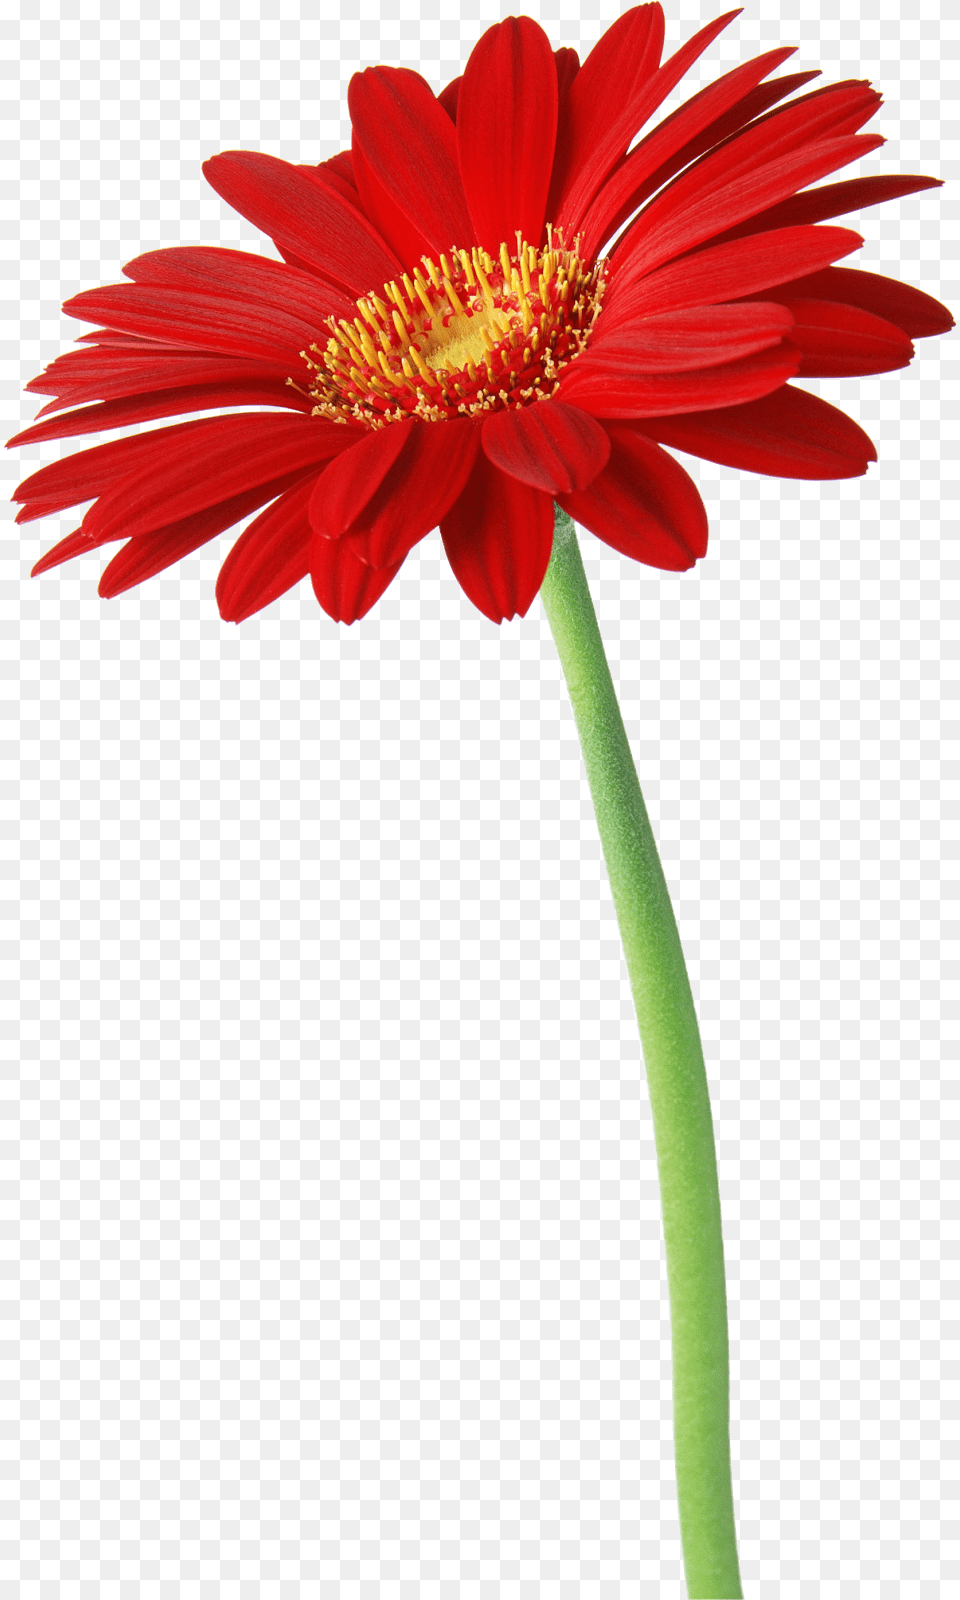 Flower Clipart Natural Shrubs Leaves Red Daisy, Anther, Plant, Dahlia, Petal Png Image